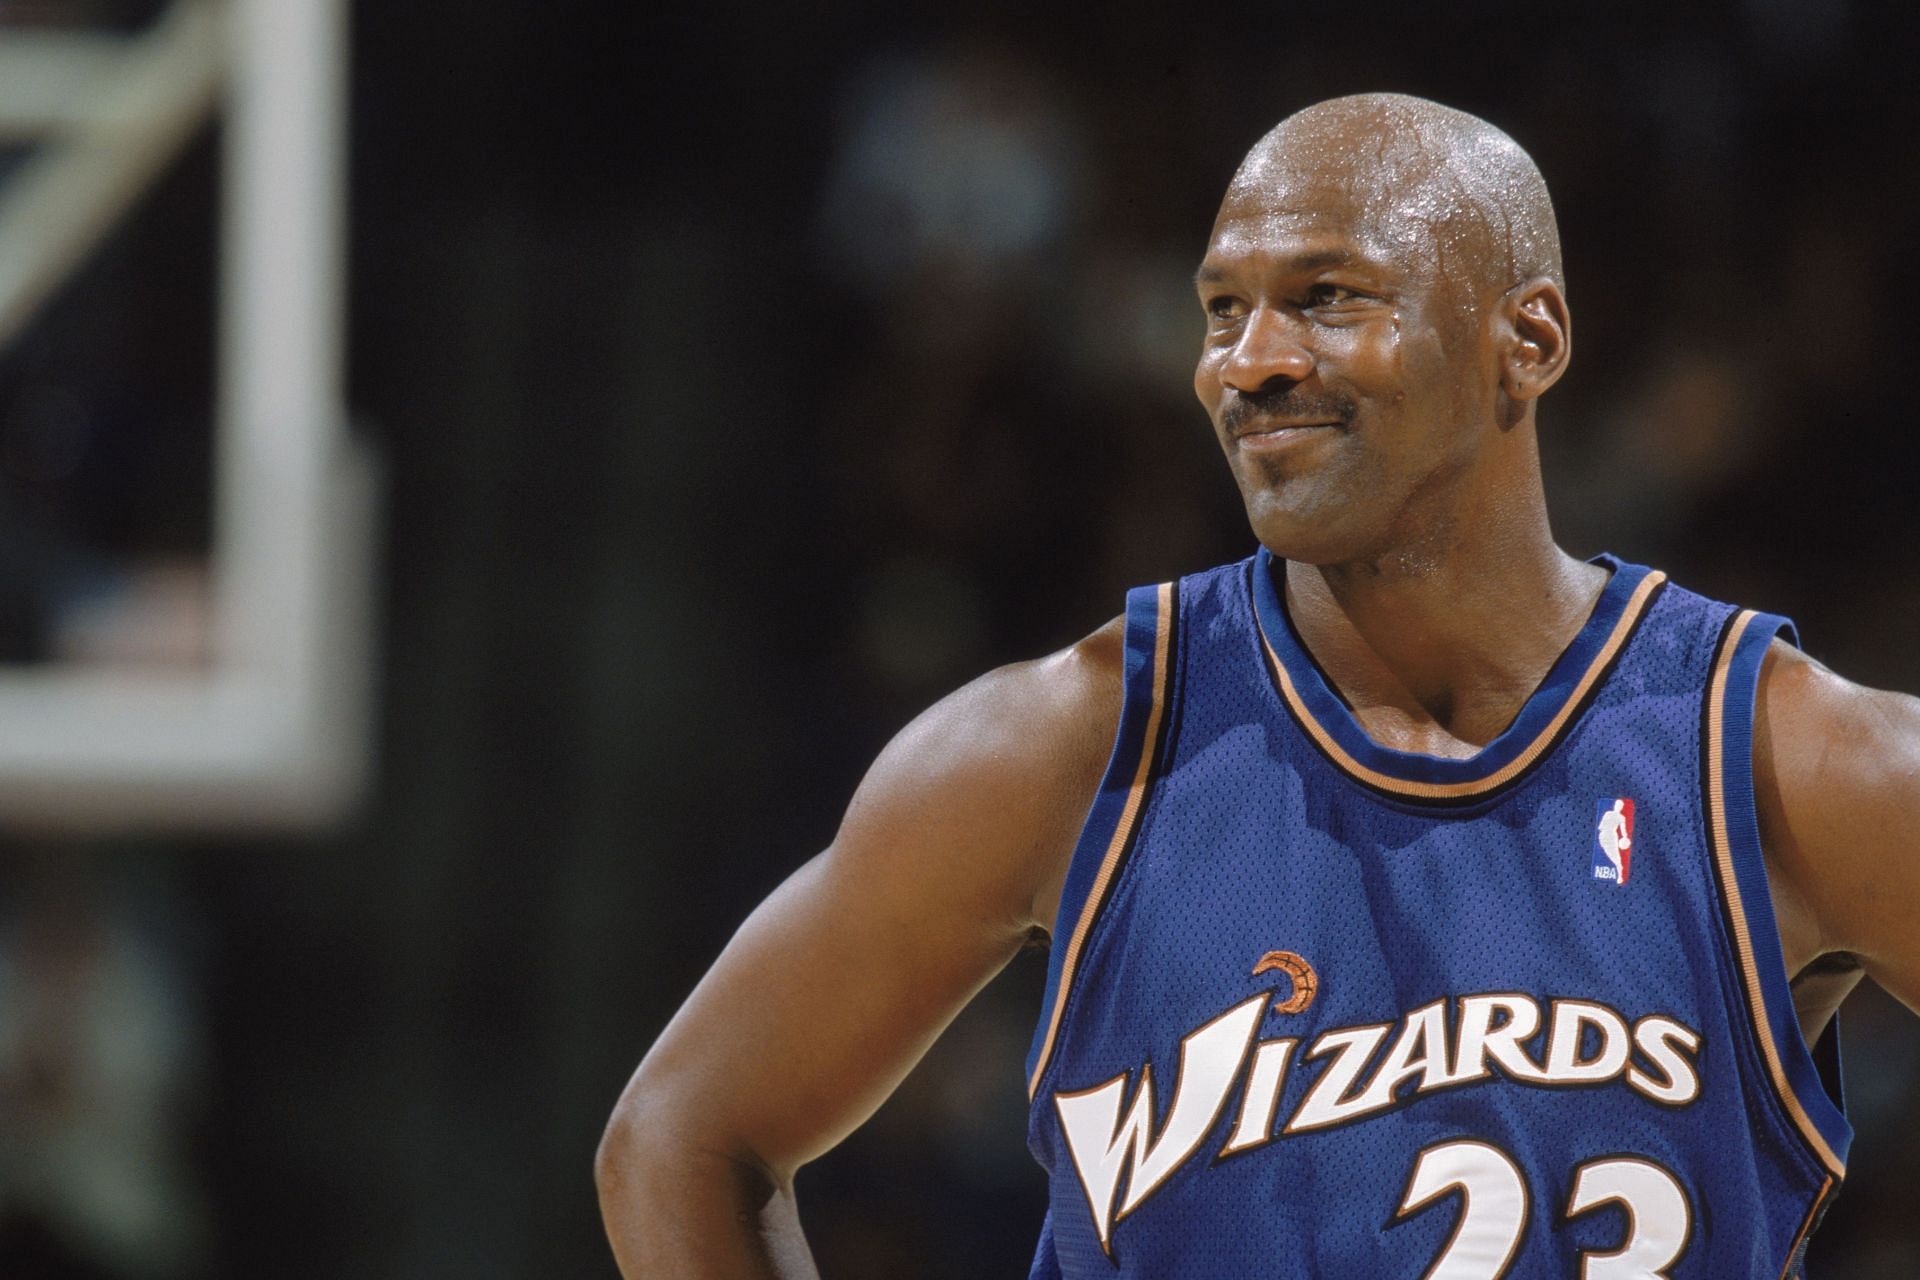 Michael Jordan with the Washington Wizards in 2002